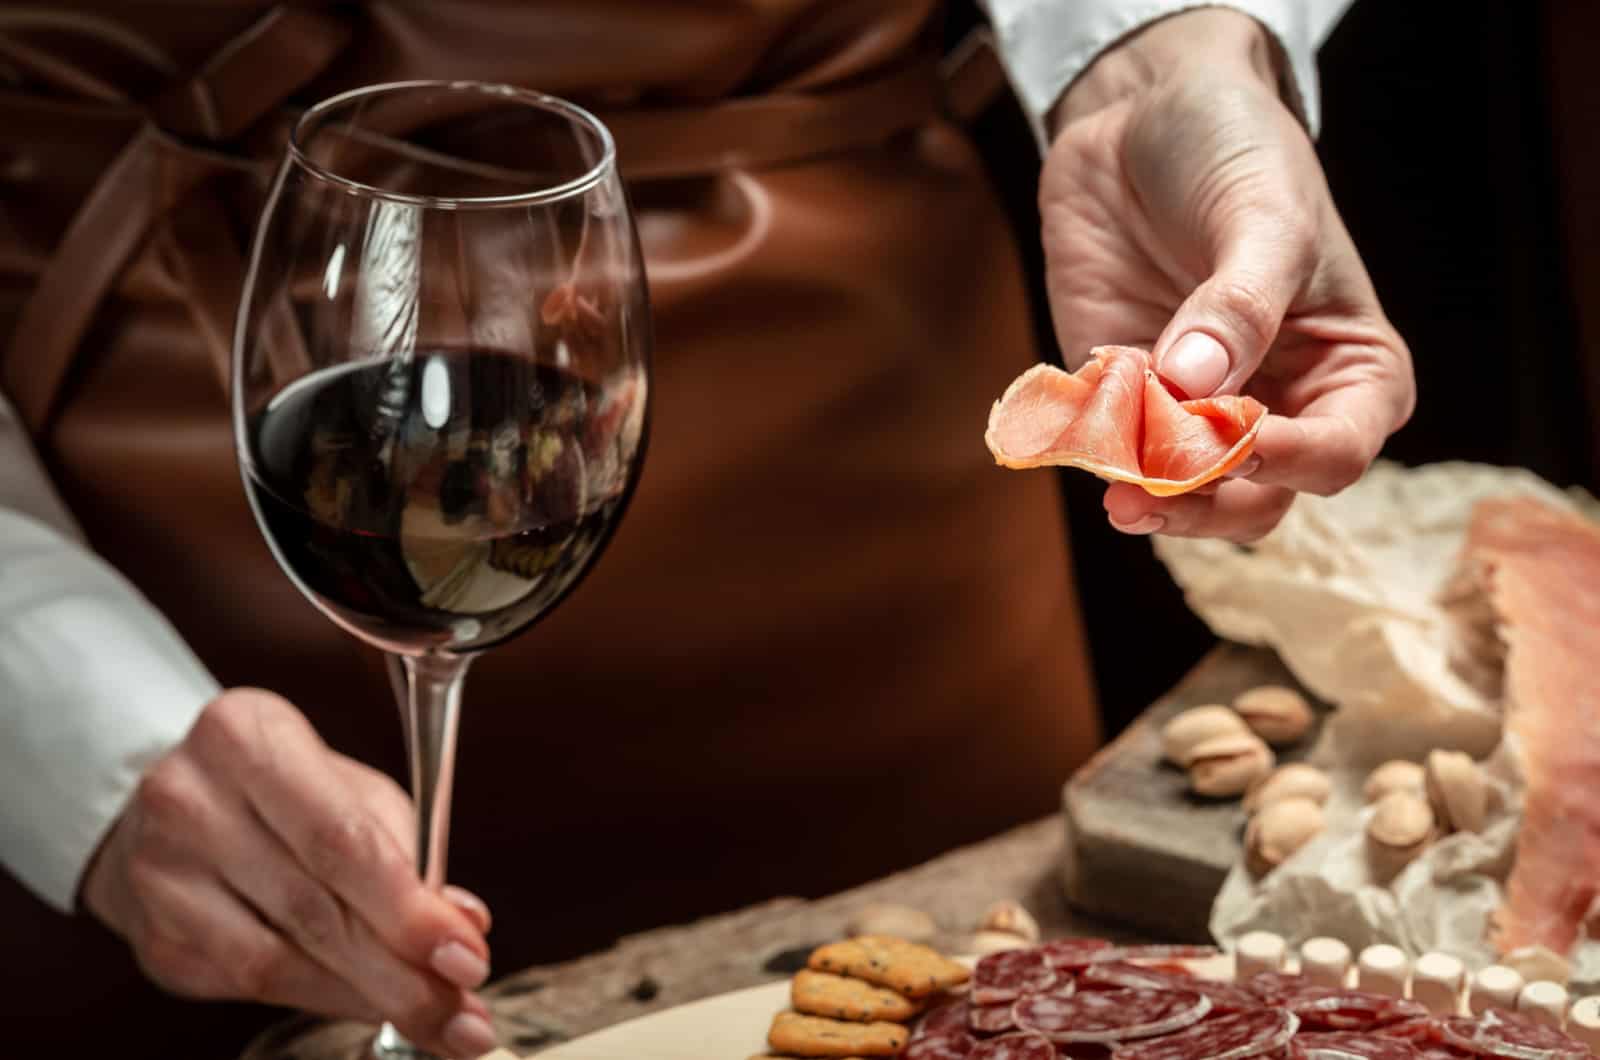 person holding a glass of wine and prosciutto